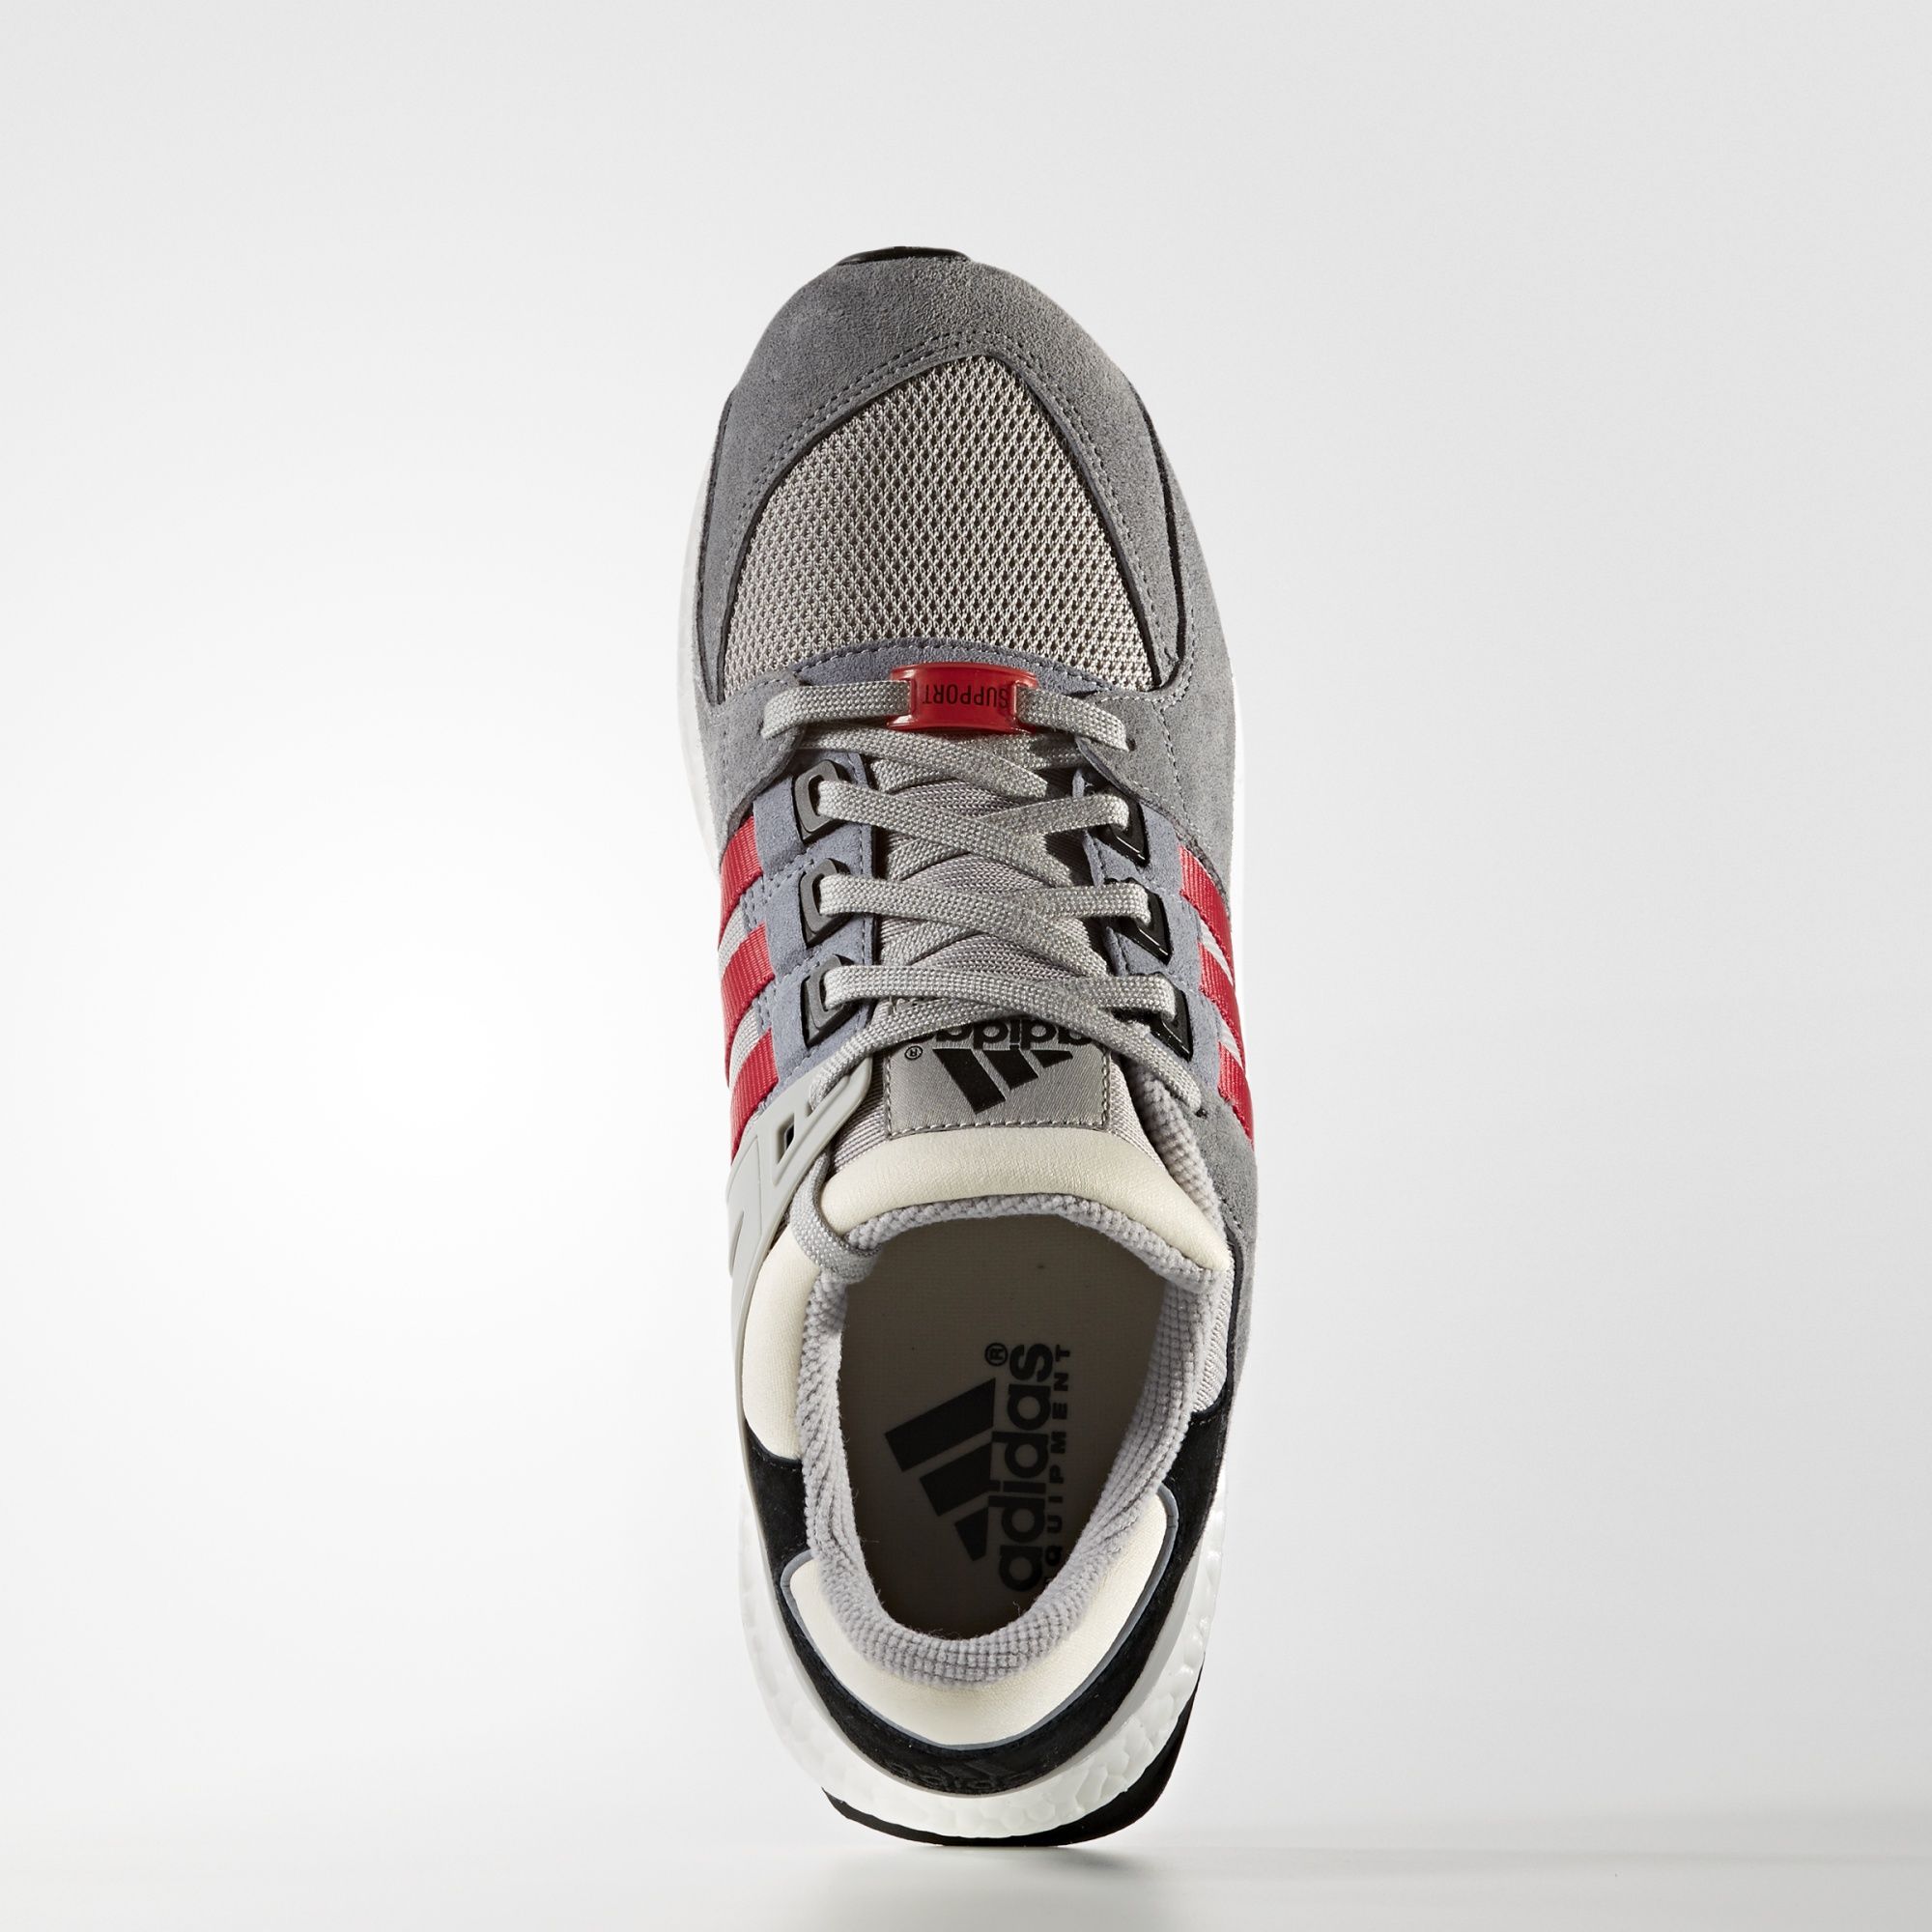 Adidas EQT Support 93/16
Mgh Solid Grey / Collegiate Red / Grey